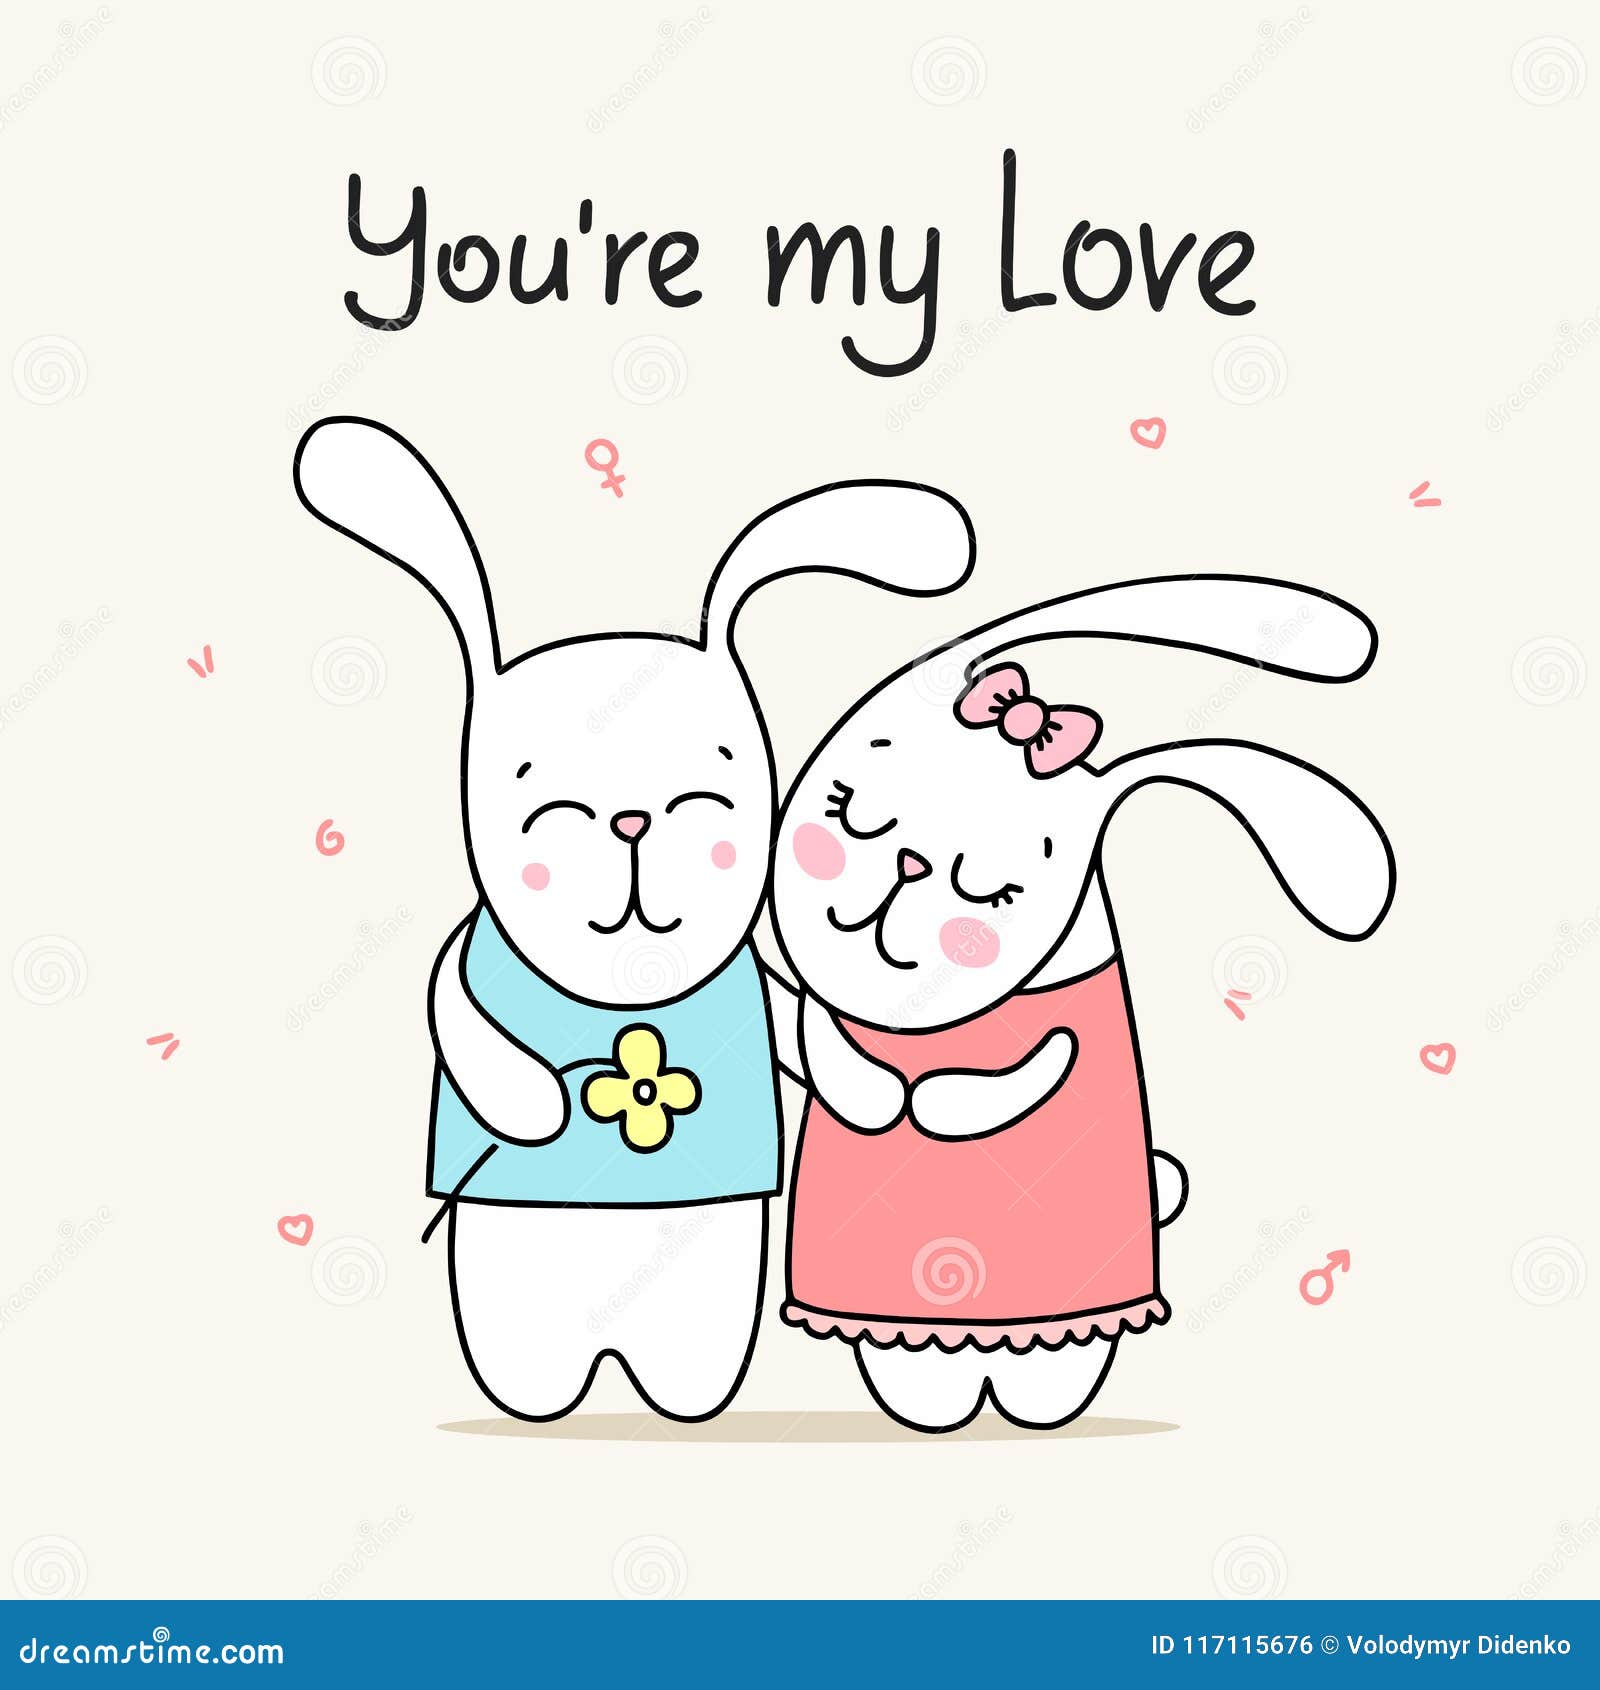 Couple of Happy Rabbits Hugs and Smiling. You are My Love Cartoon Flat  Vector Illustration Card Stock Vector - Illustration of colored, cute:  117115676